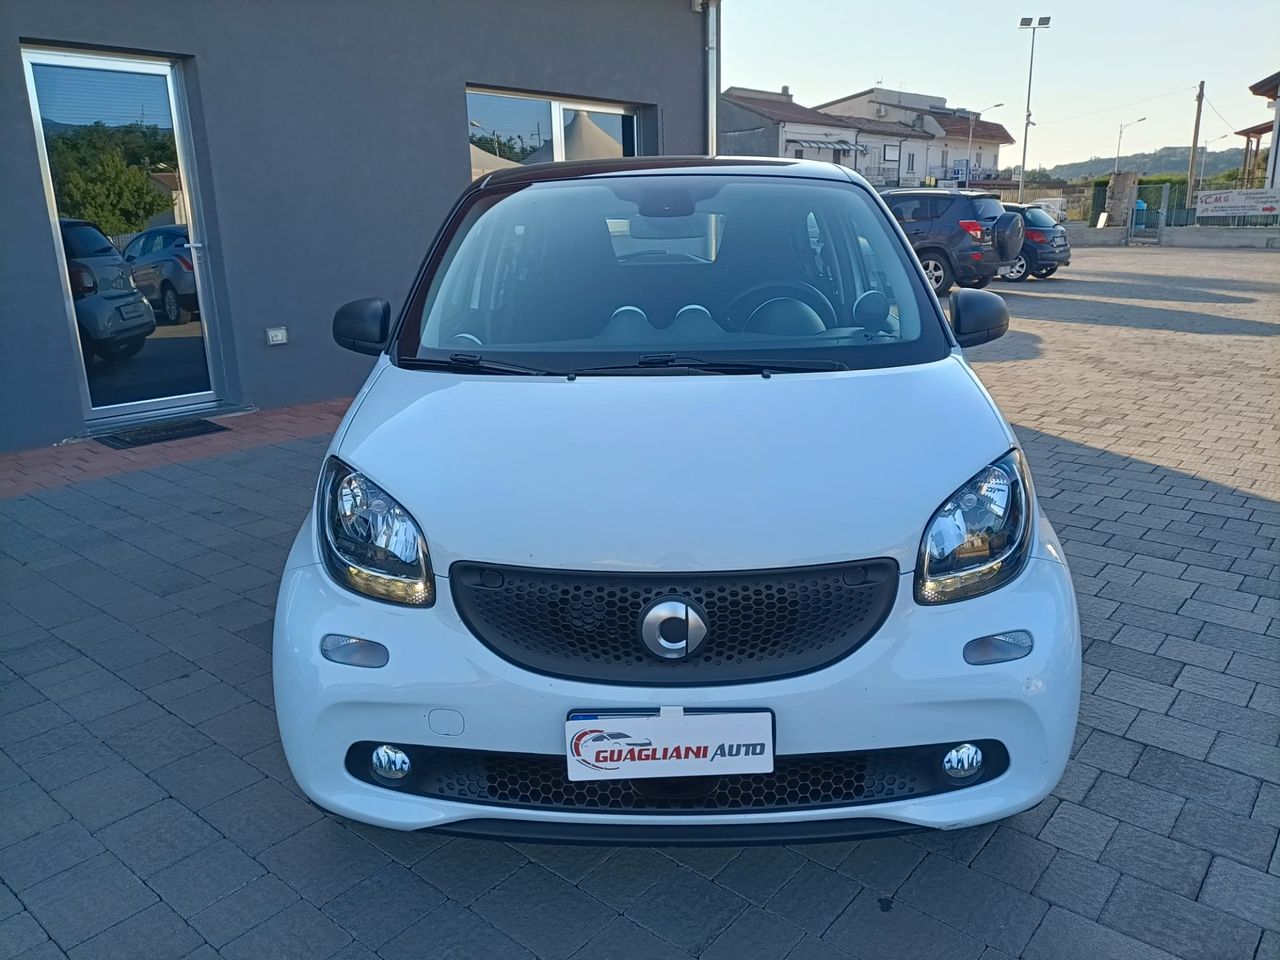 Smart ForFour 70 1.0 Youngster